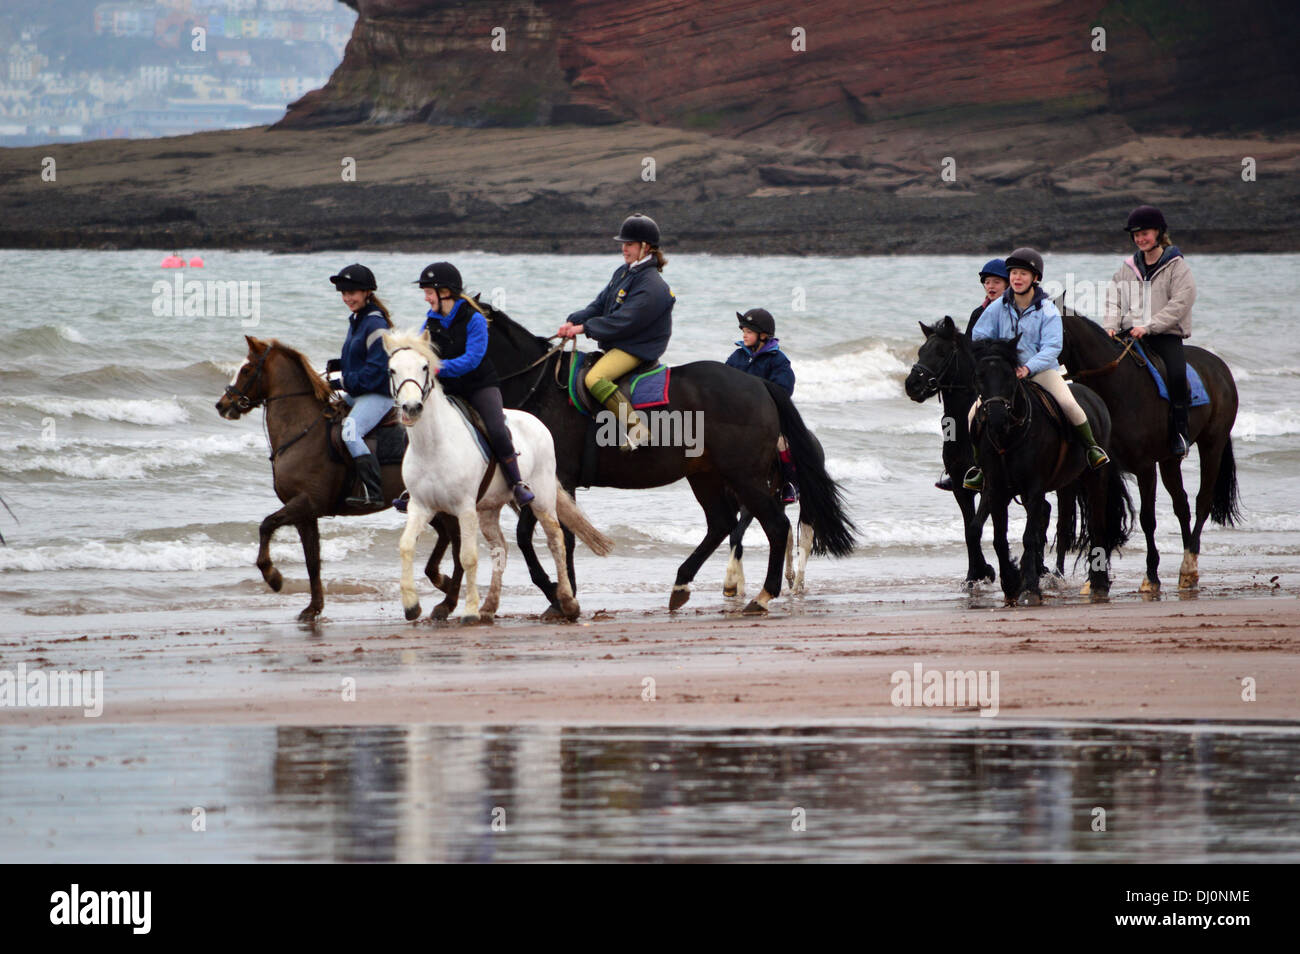 Group of horses and riders on beach at Paignton, Torbay, Devon, England, United Kingdom Stock Photo